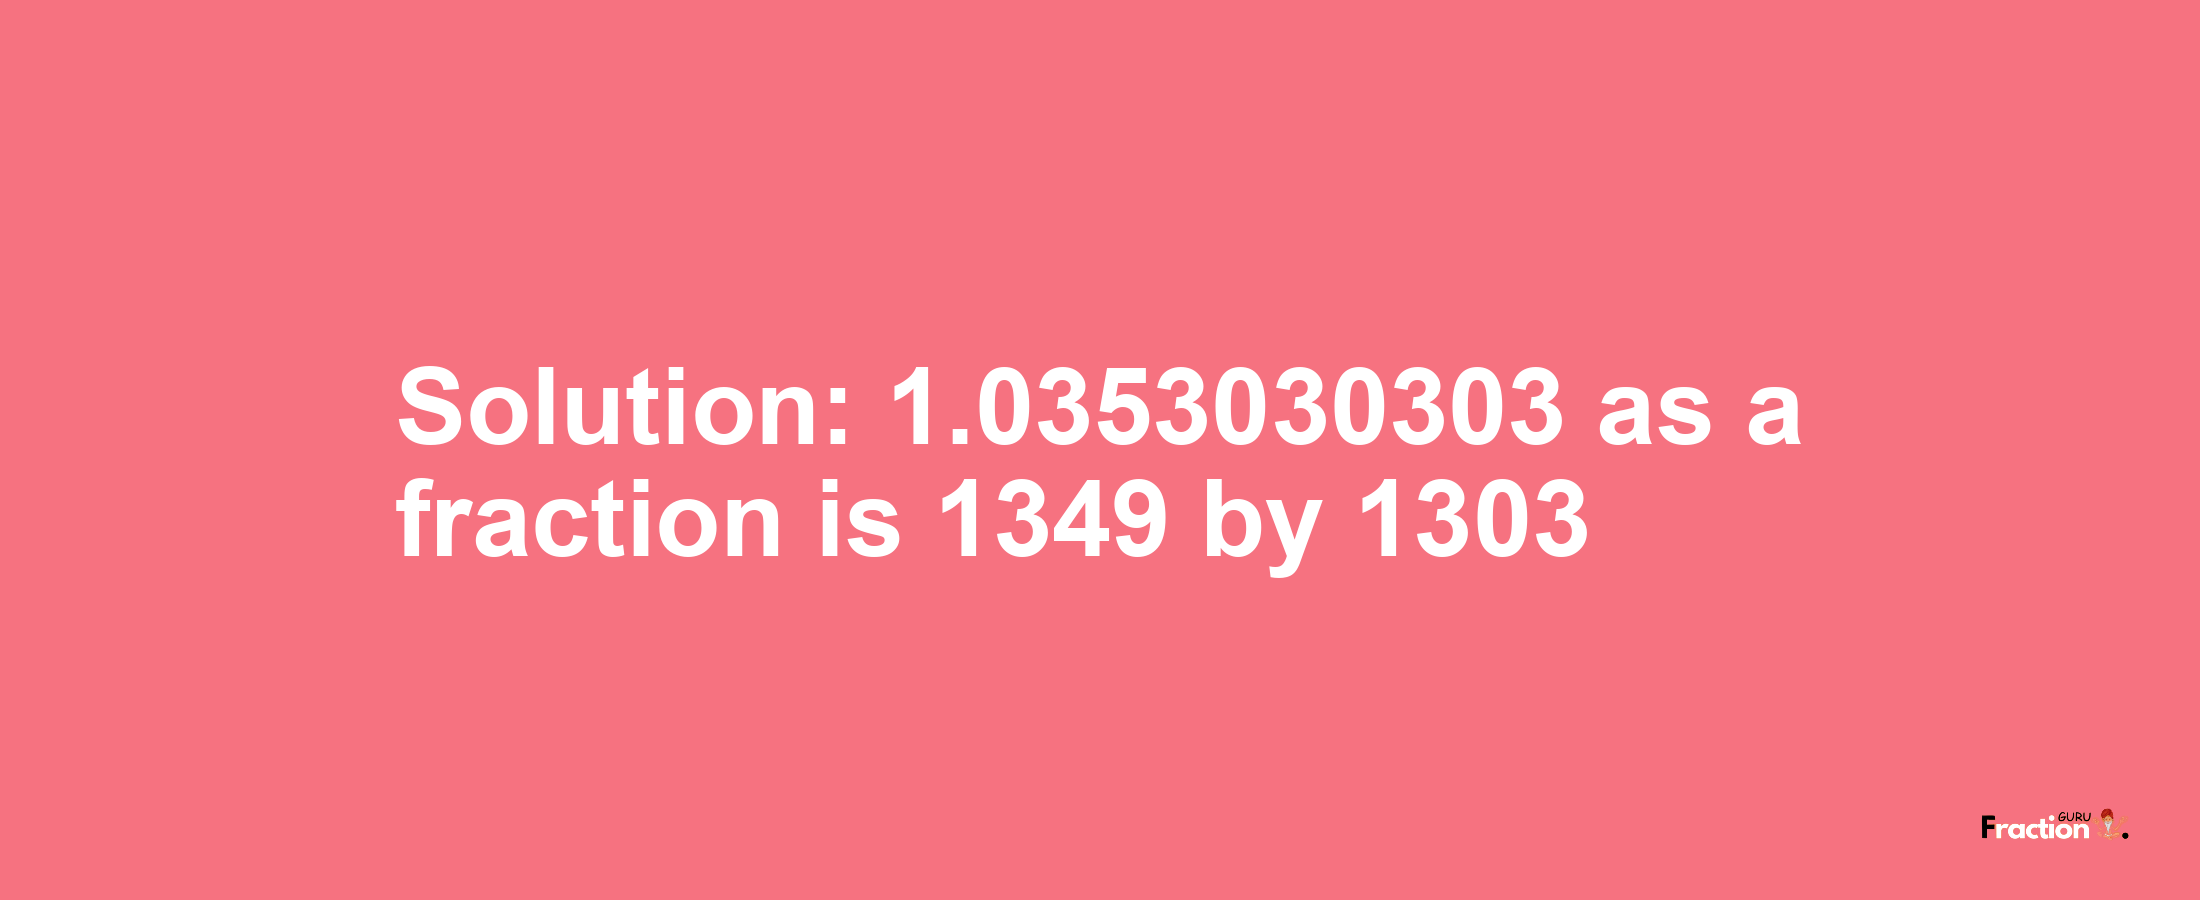 Solution:1.0353030303 as a fraction is 1349/1303